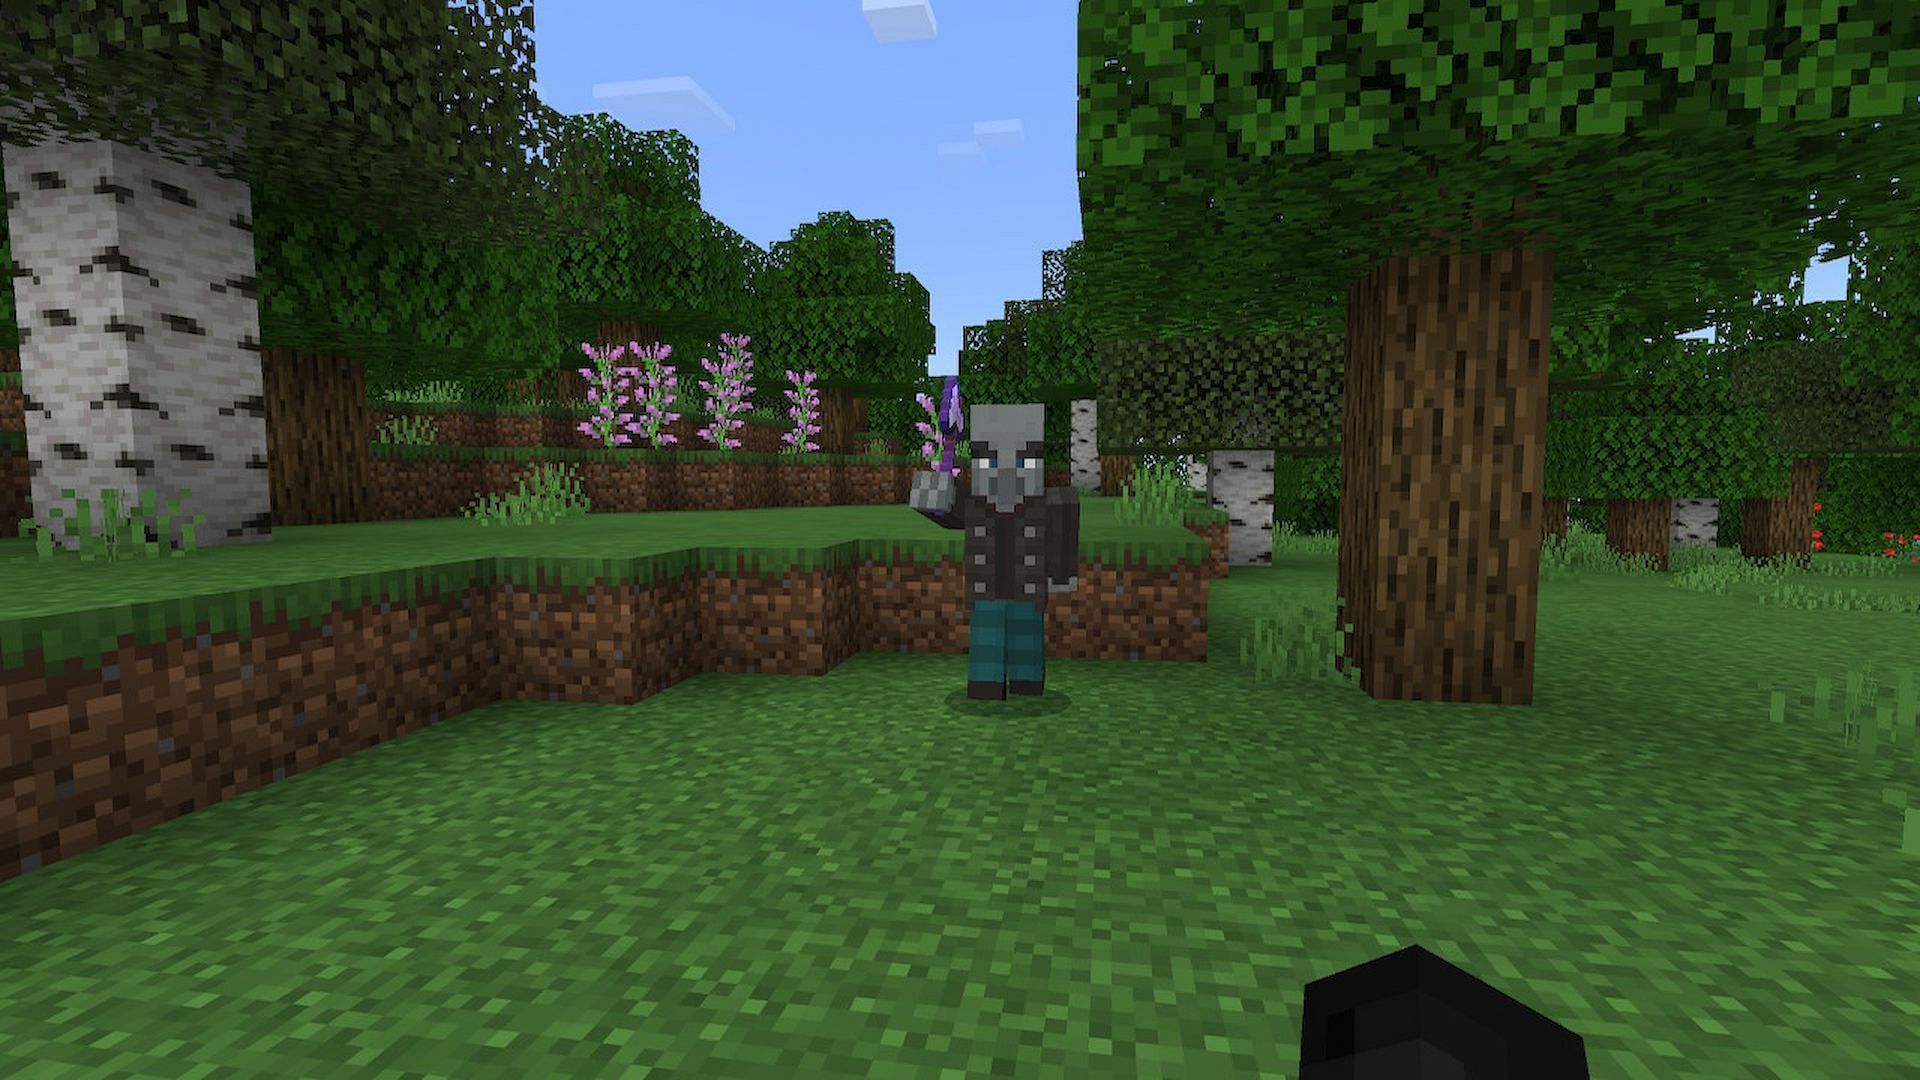 Vindicators can be very hard to defeat if a player is caught off guard. (Image via Minecraft)